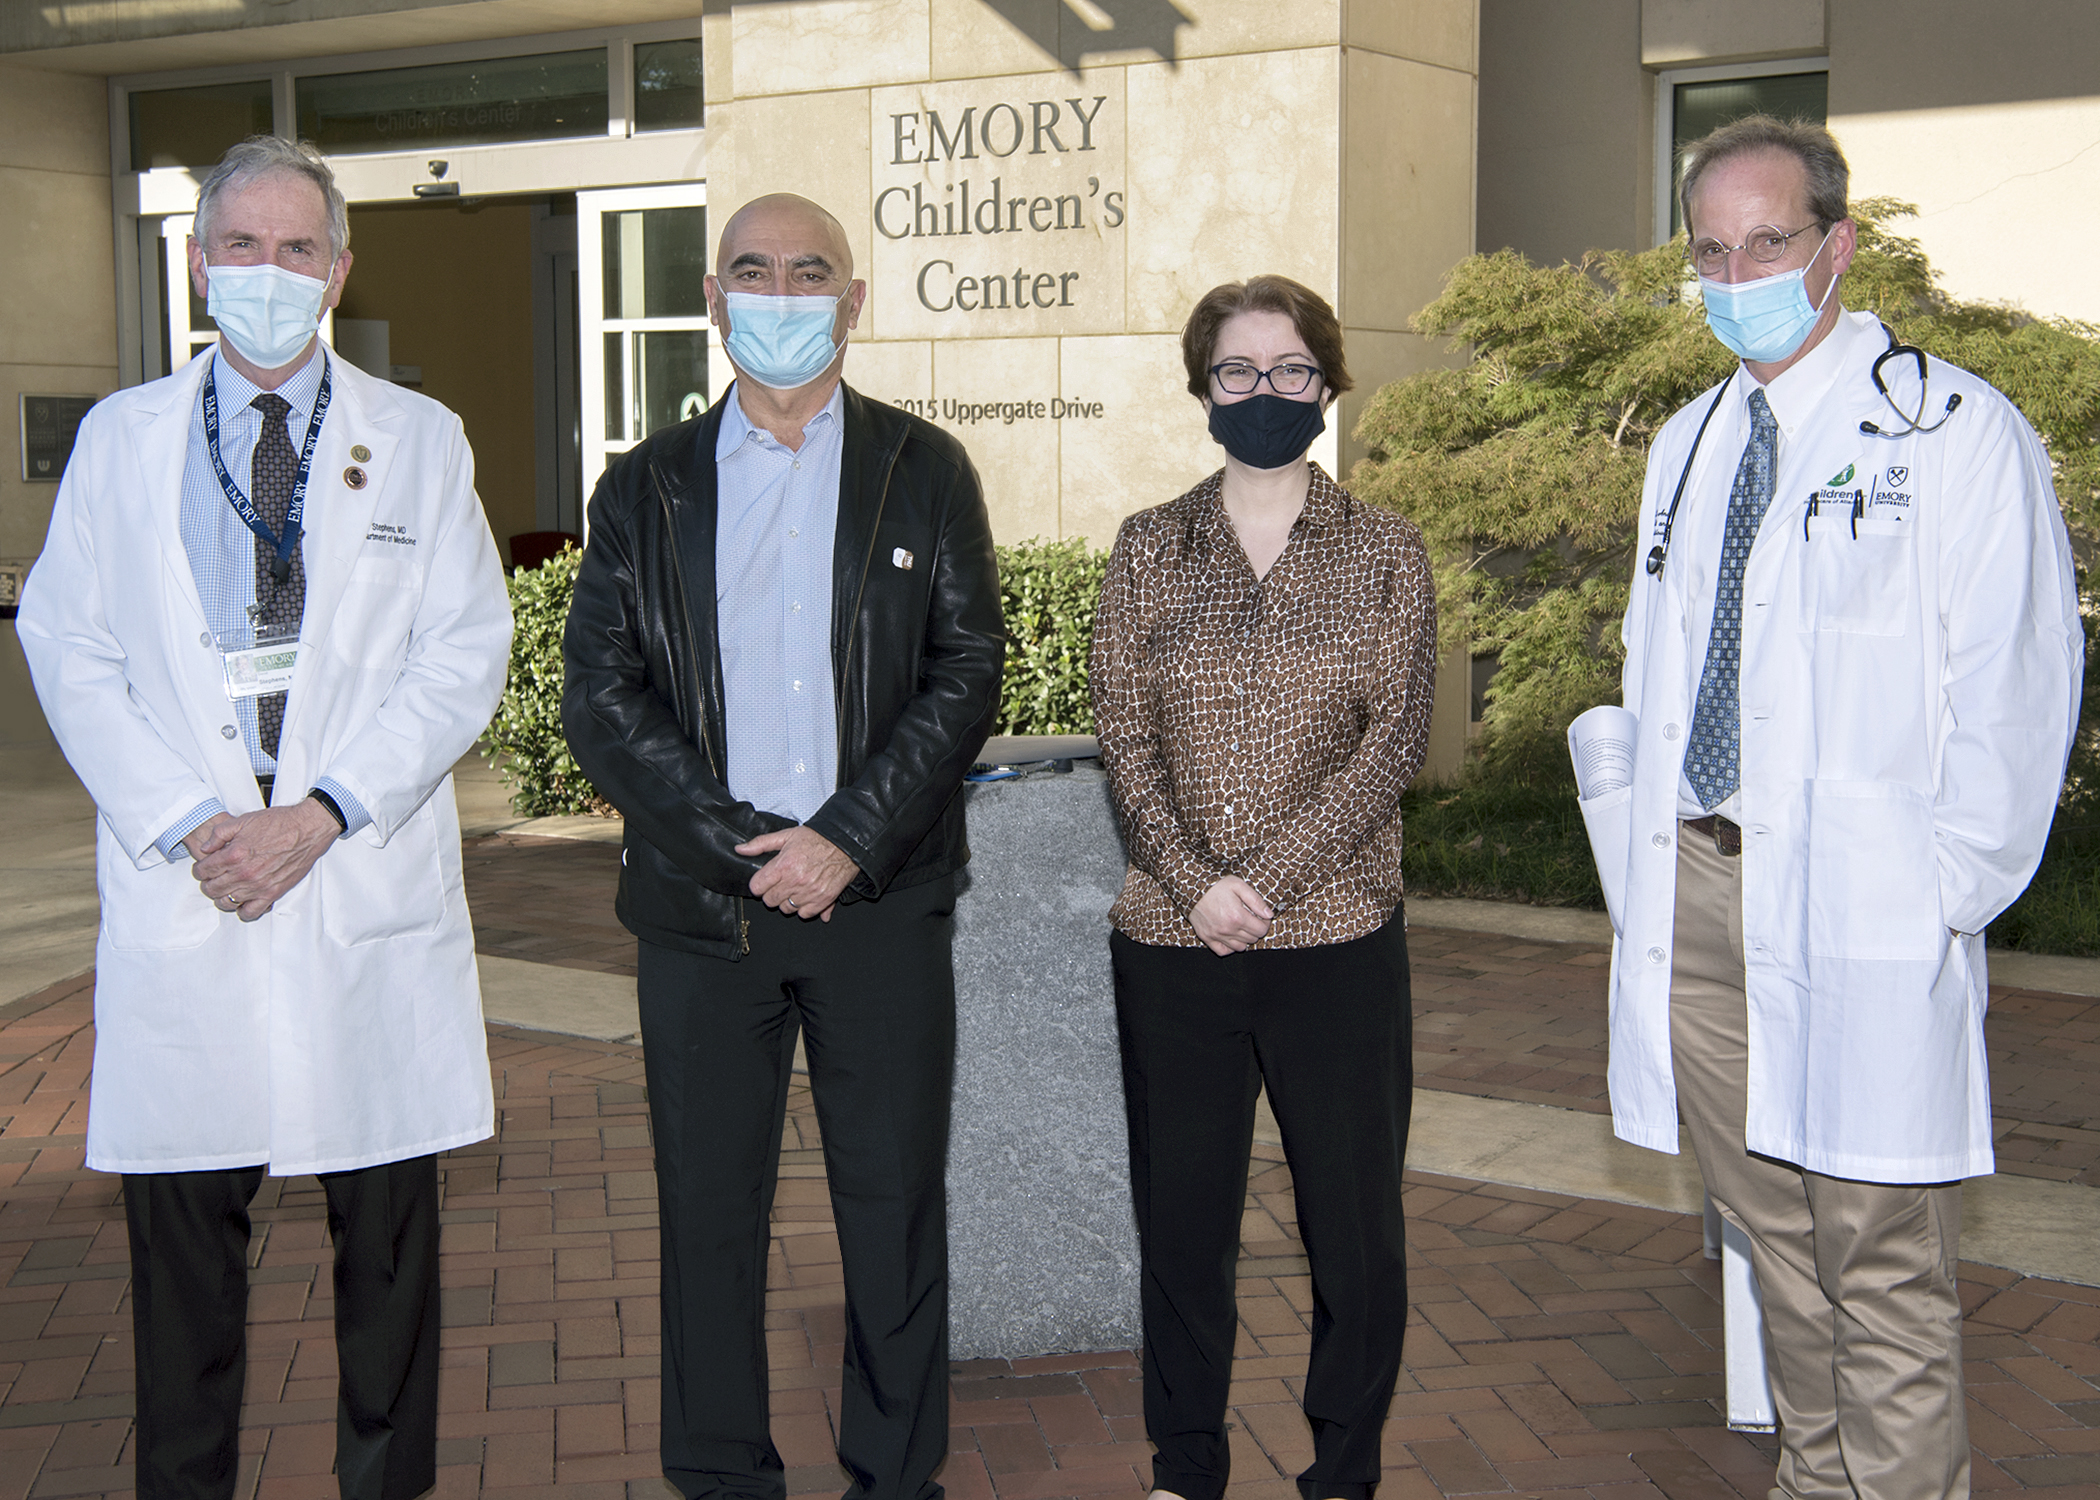 Warp Speed chief visits Emory, urges participation in COVID vaccine trials